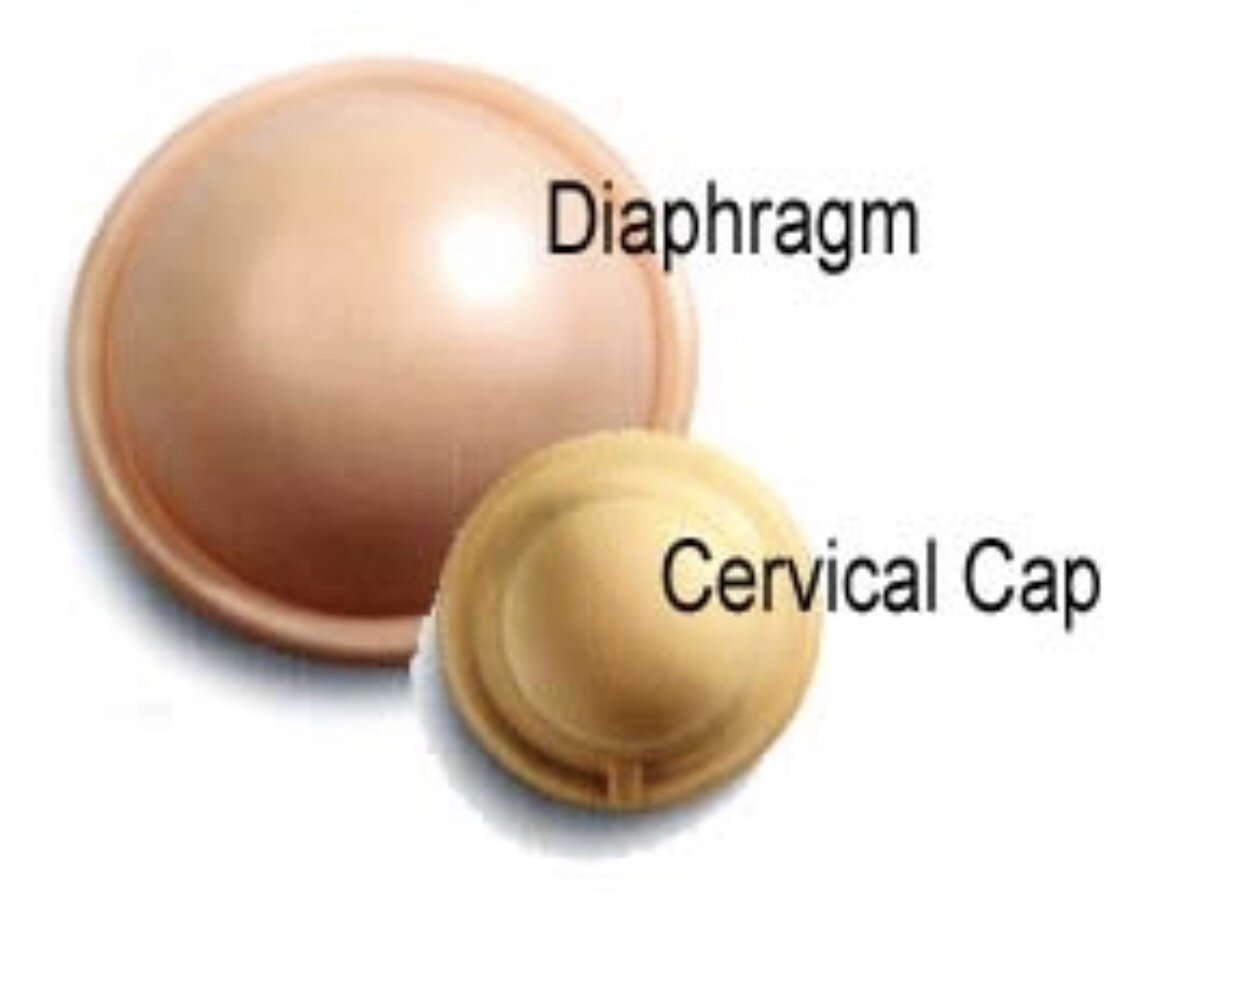 Difference between diaphragm and cervical cap contraceptive